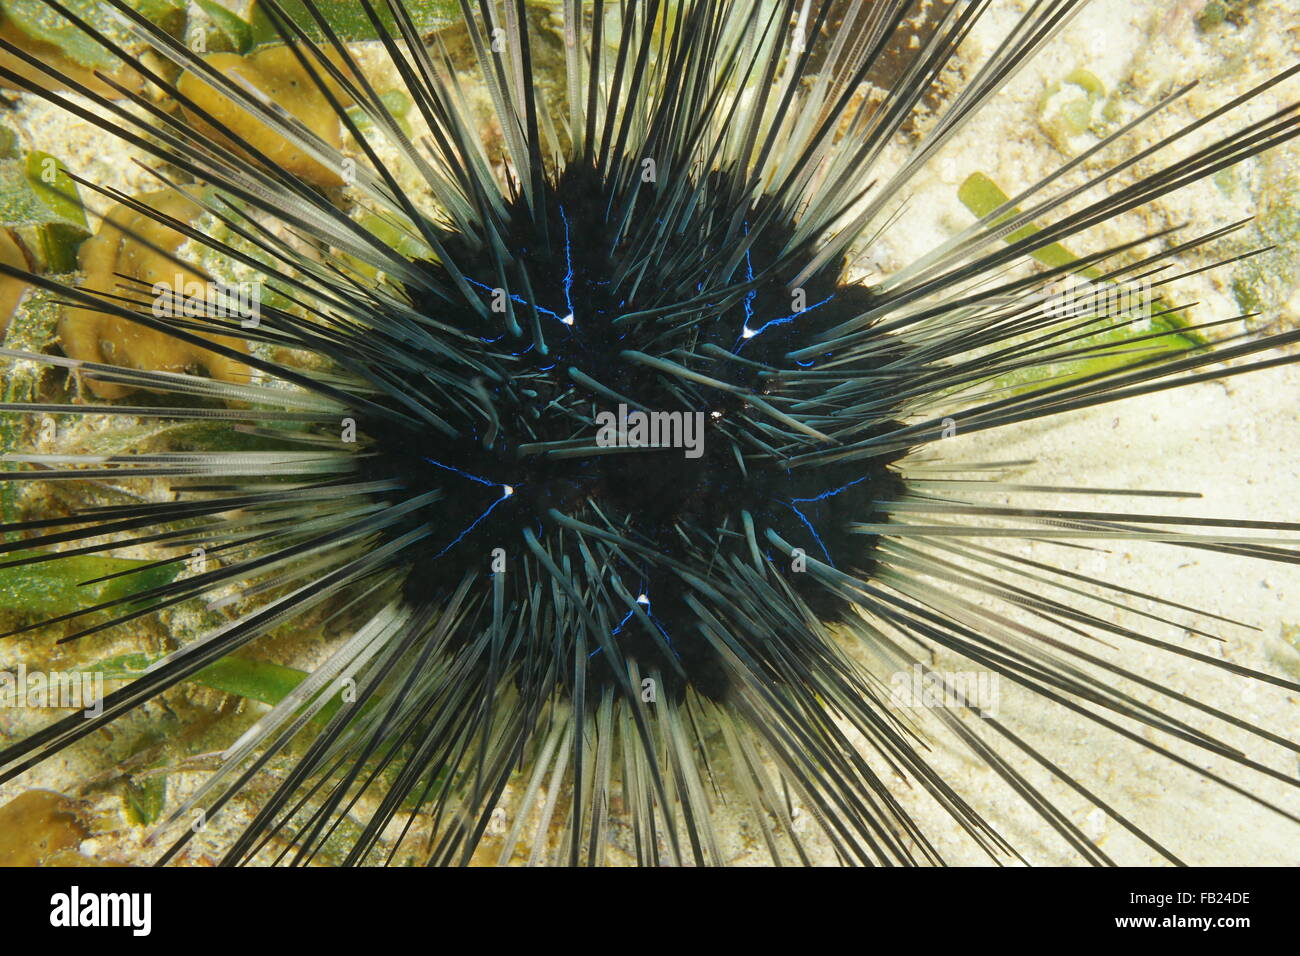 Blue lines of a long spined urchin viewed from above, underwater on the seabed of the Caribbean sea, Costa Rica, Central America Stock Photo